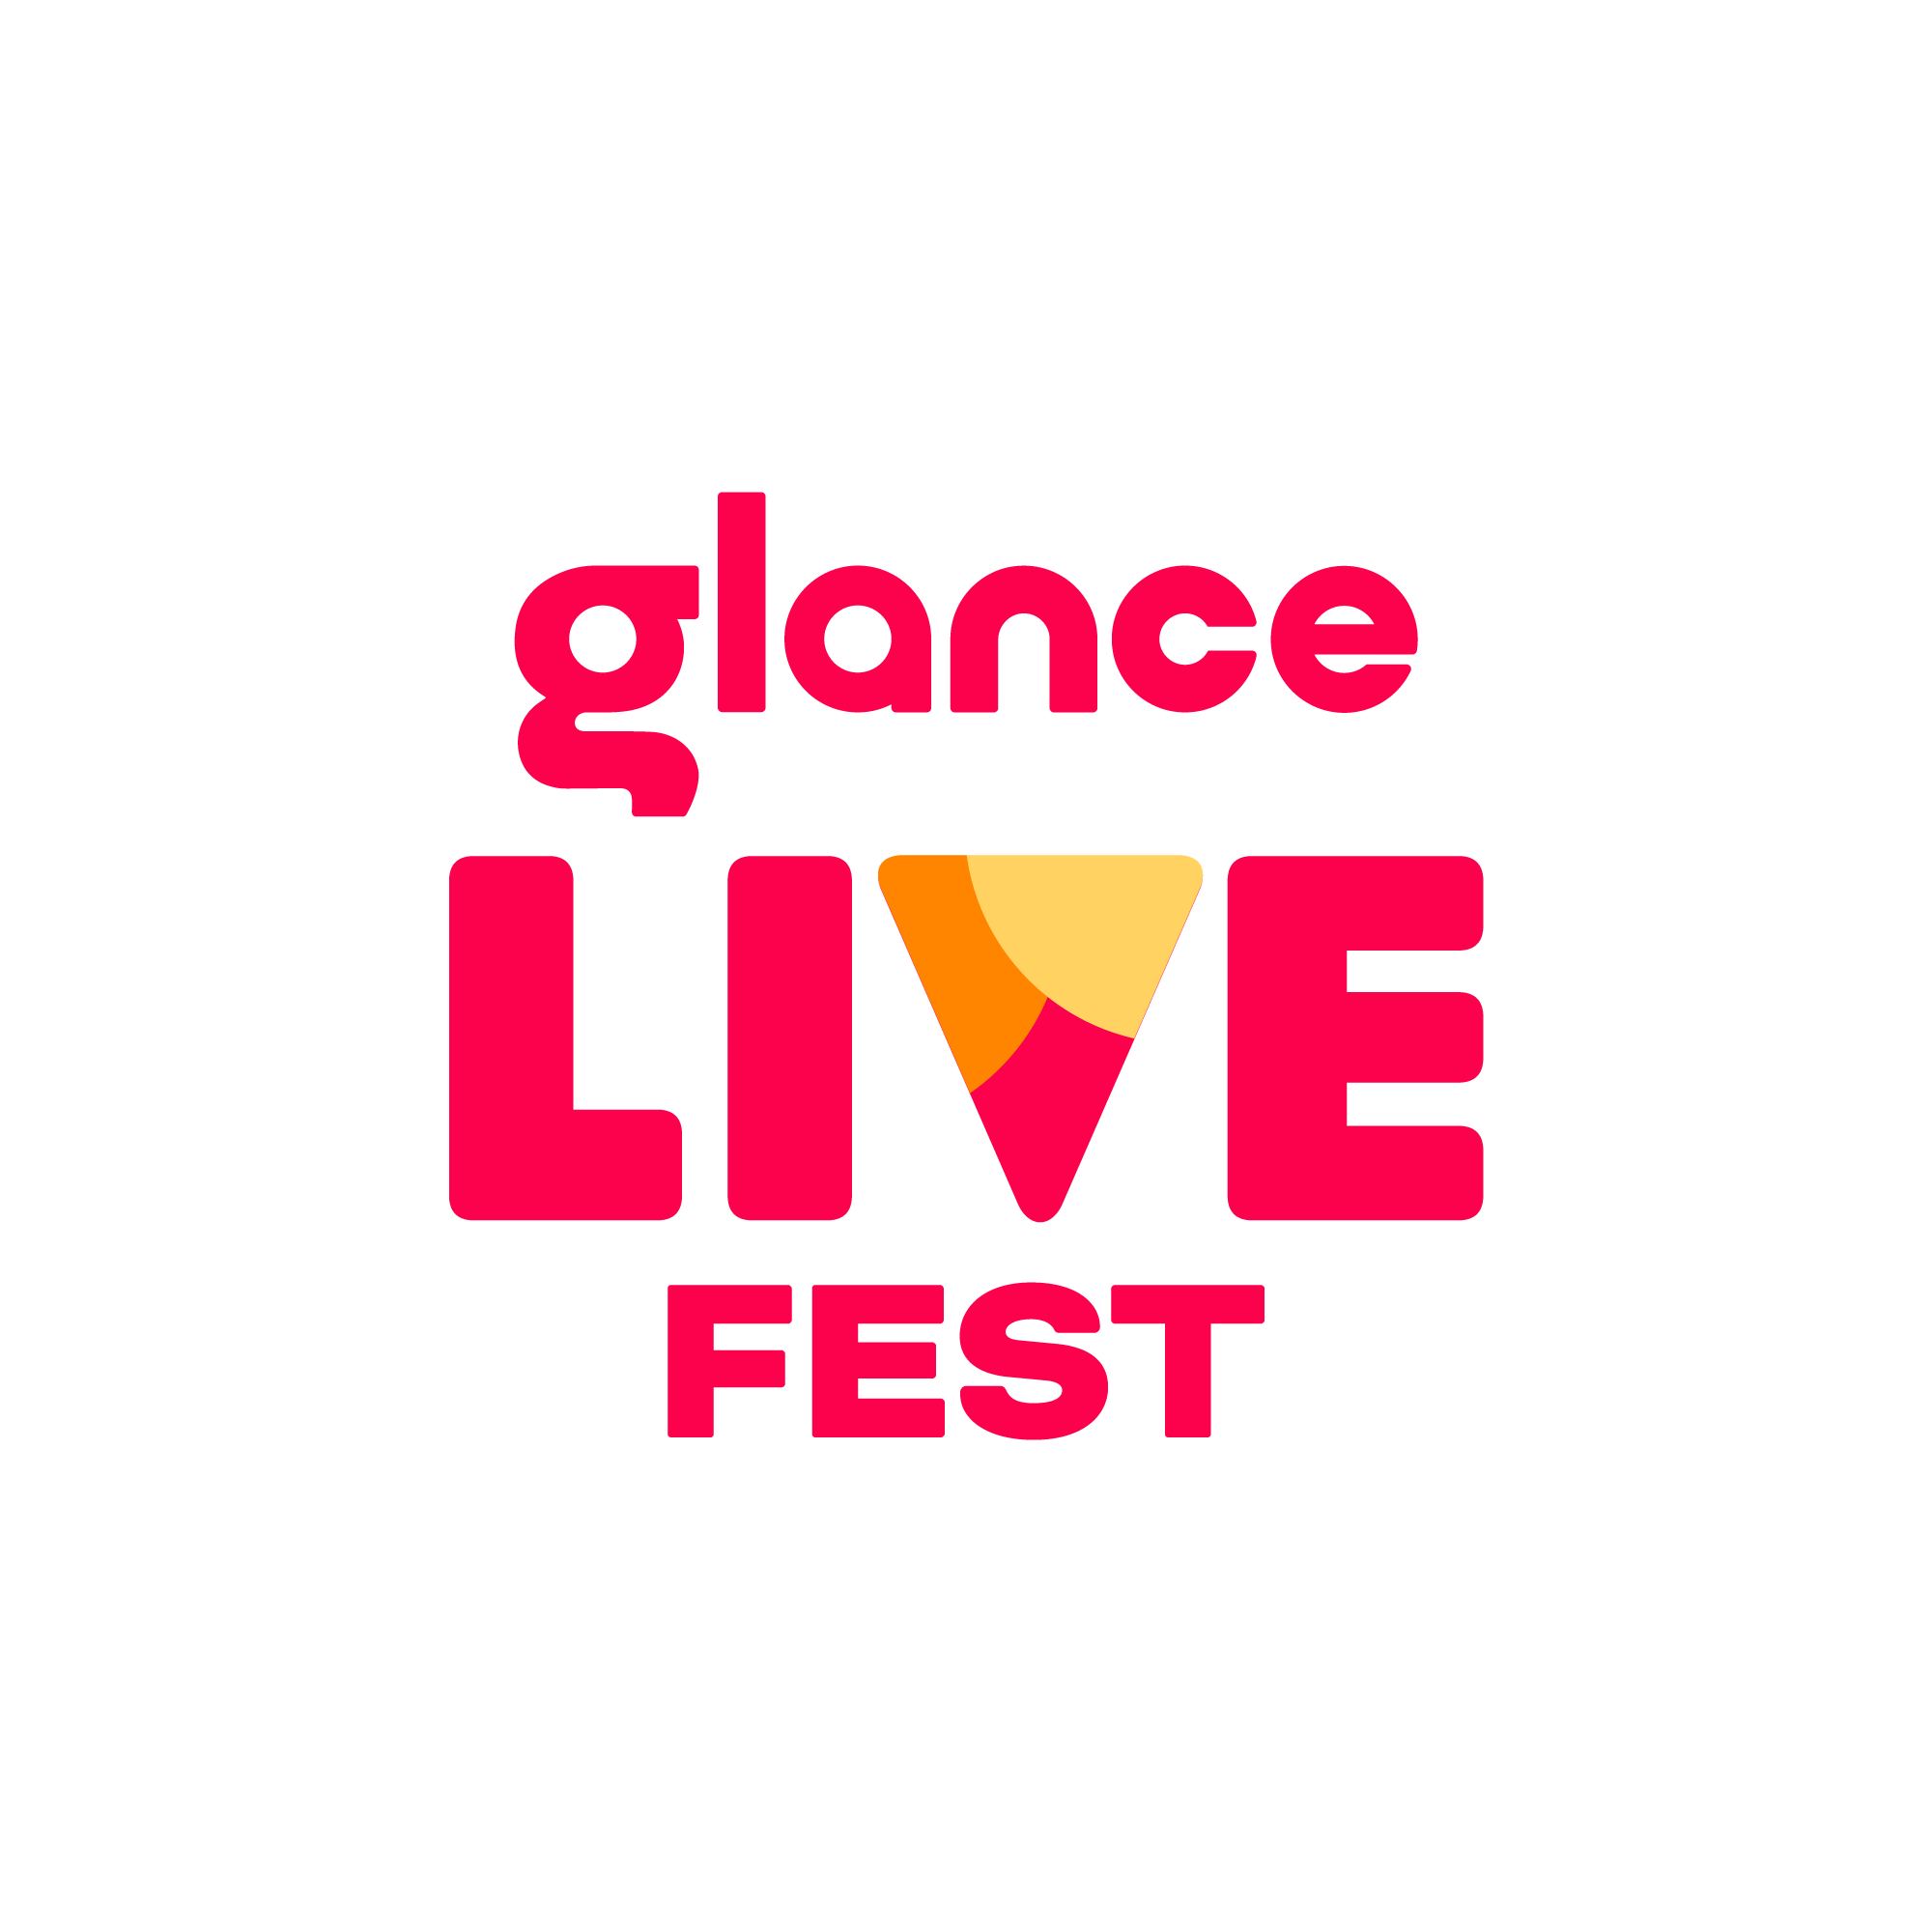 Glance launches India’s largest live, interactive festival on smartphone lock screens